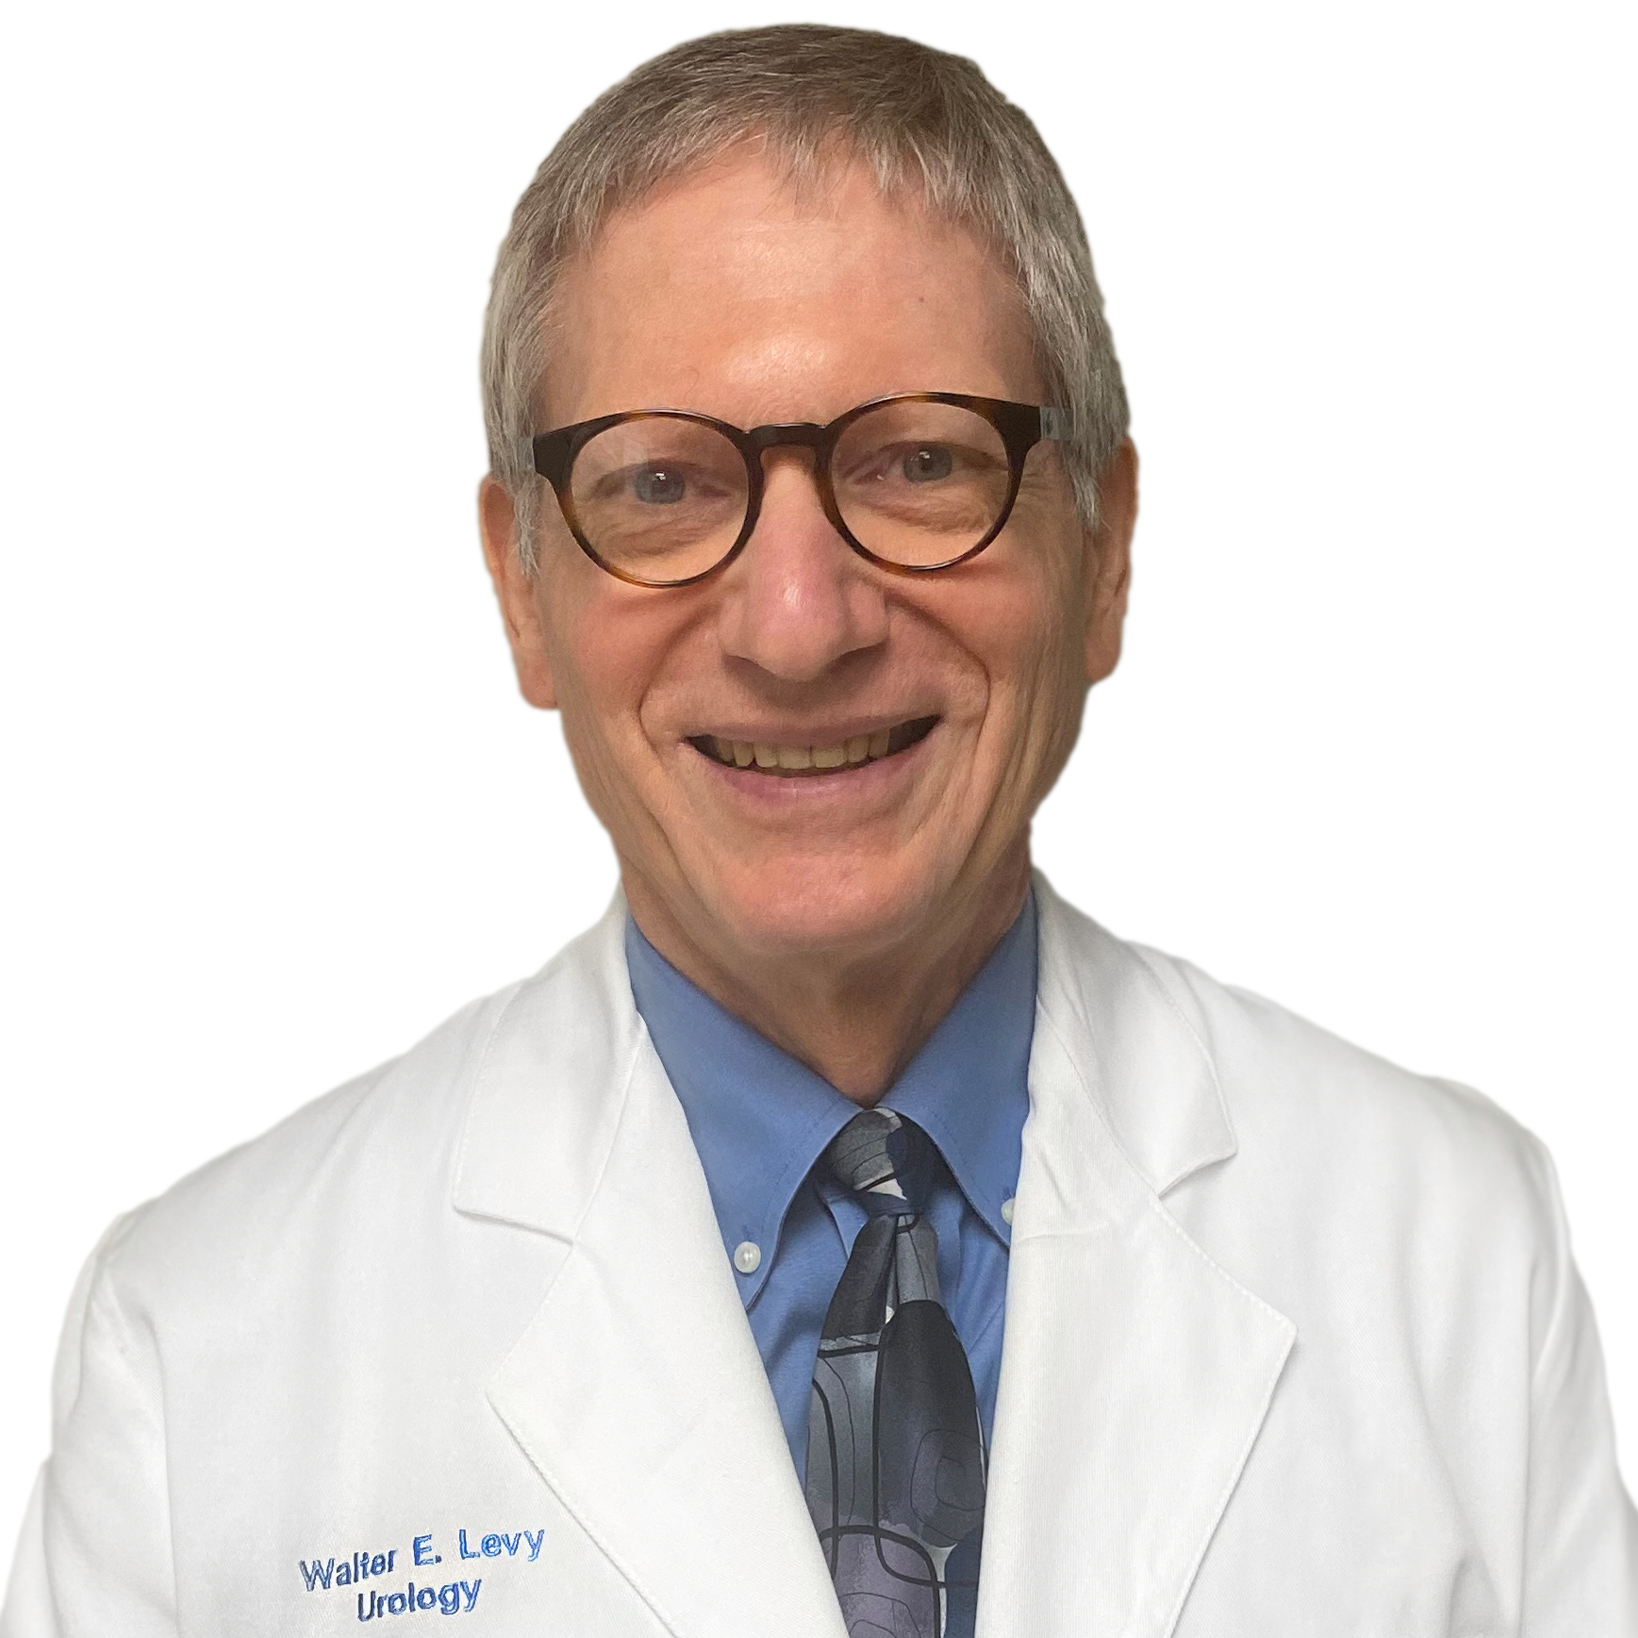 WALTER LEVY, MD